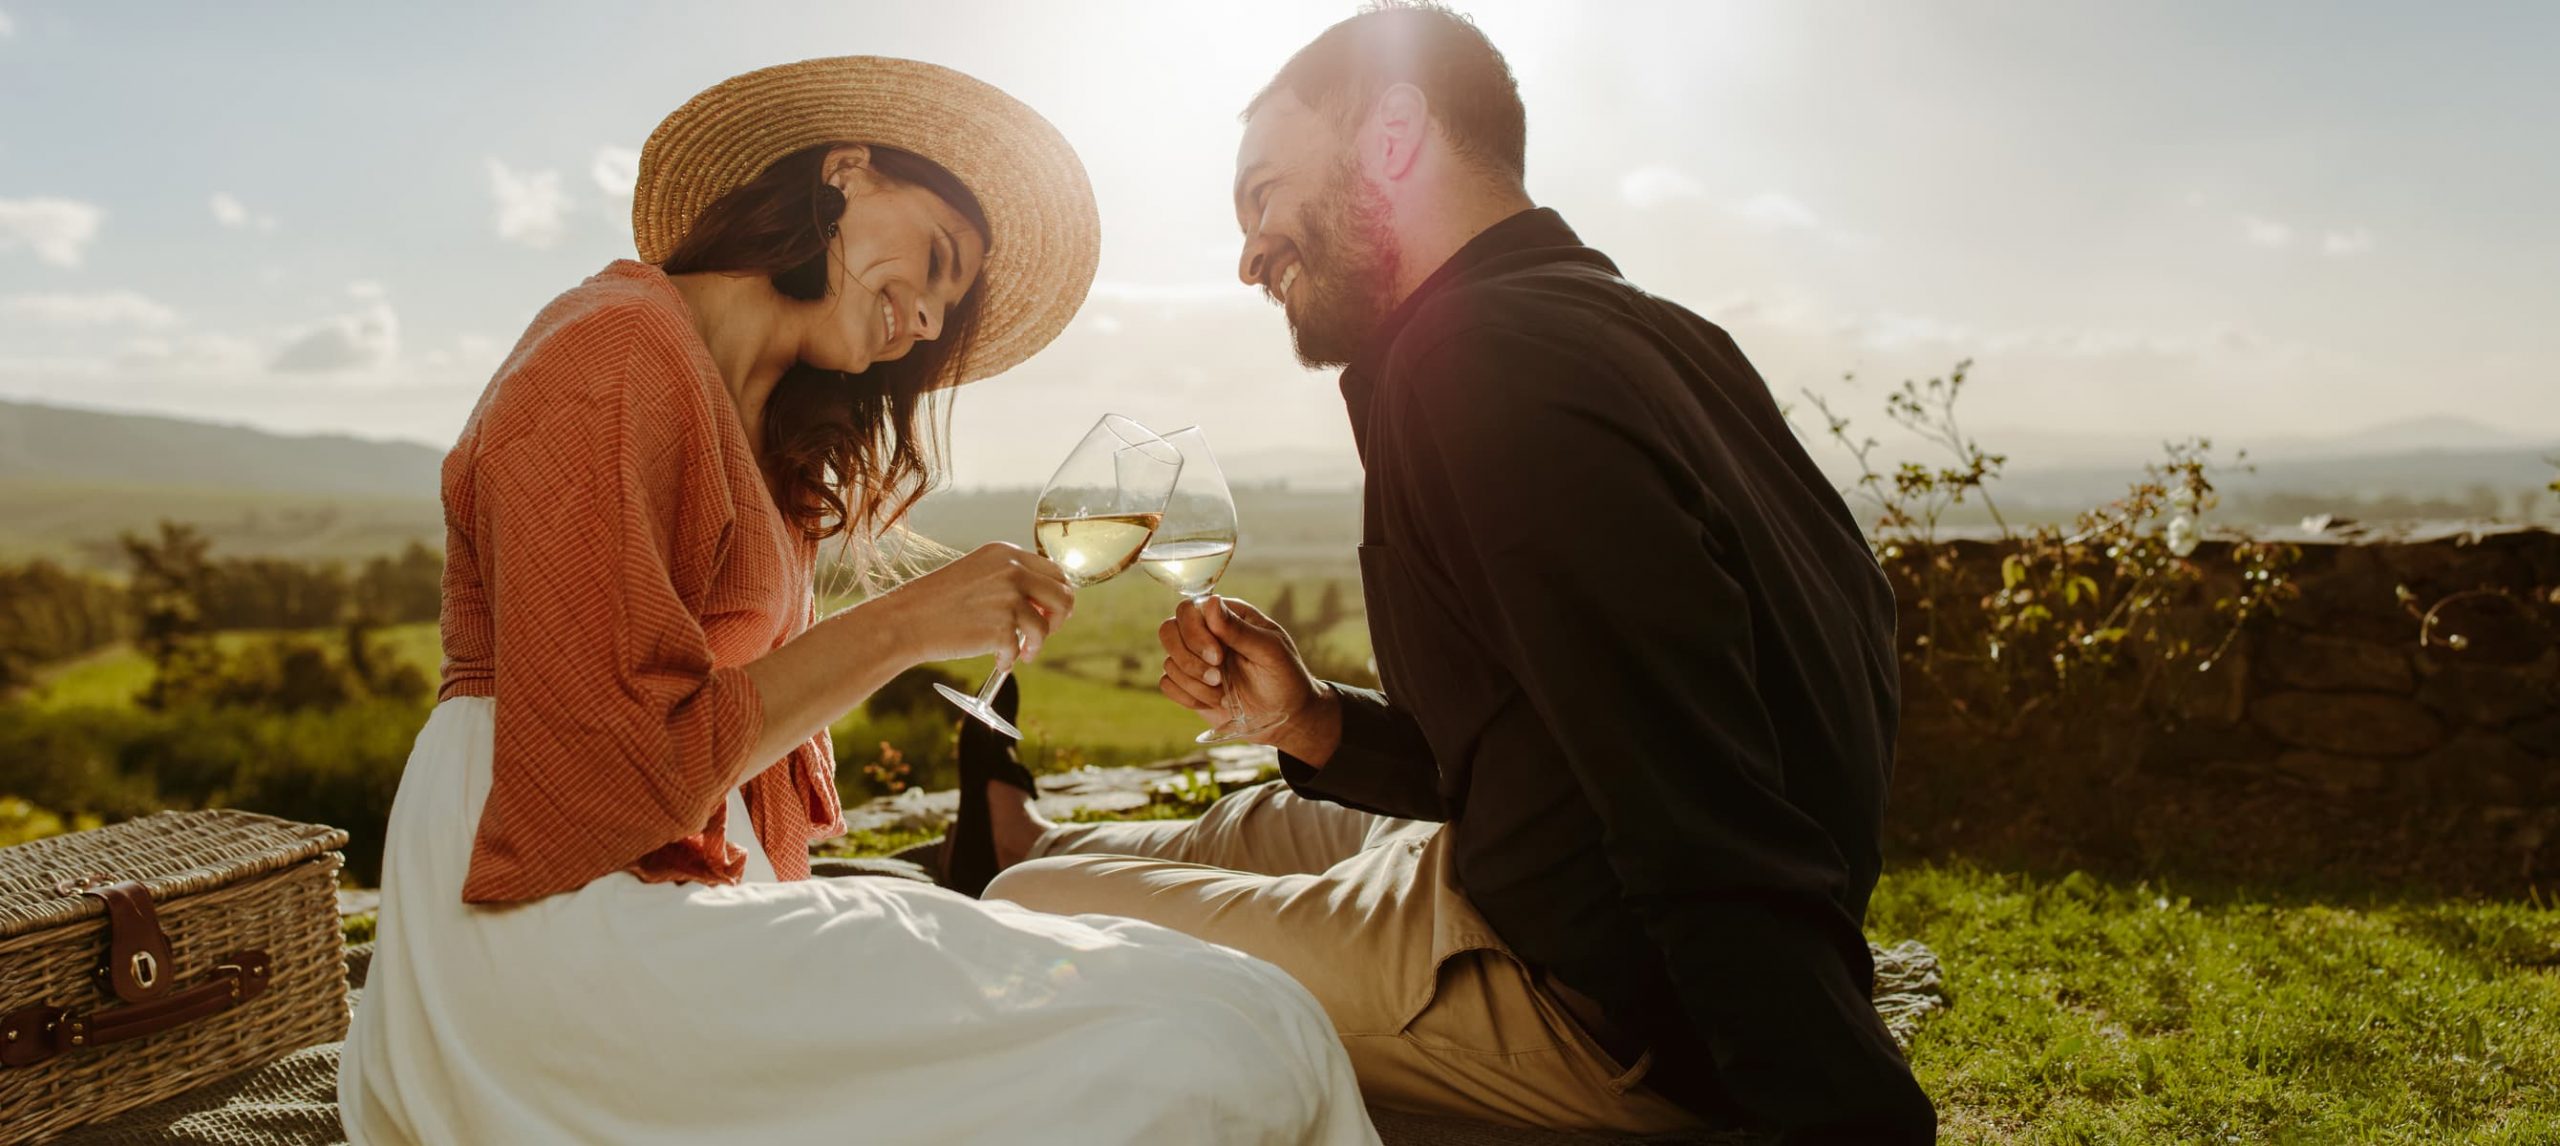 A smiling couple toasting at a vineyard during a sunset picnic.